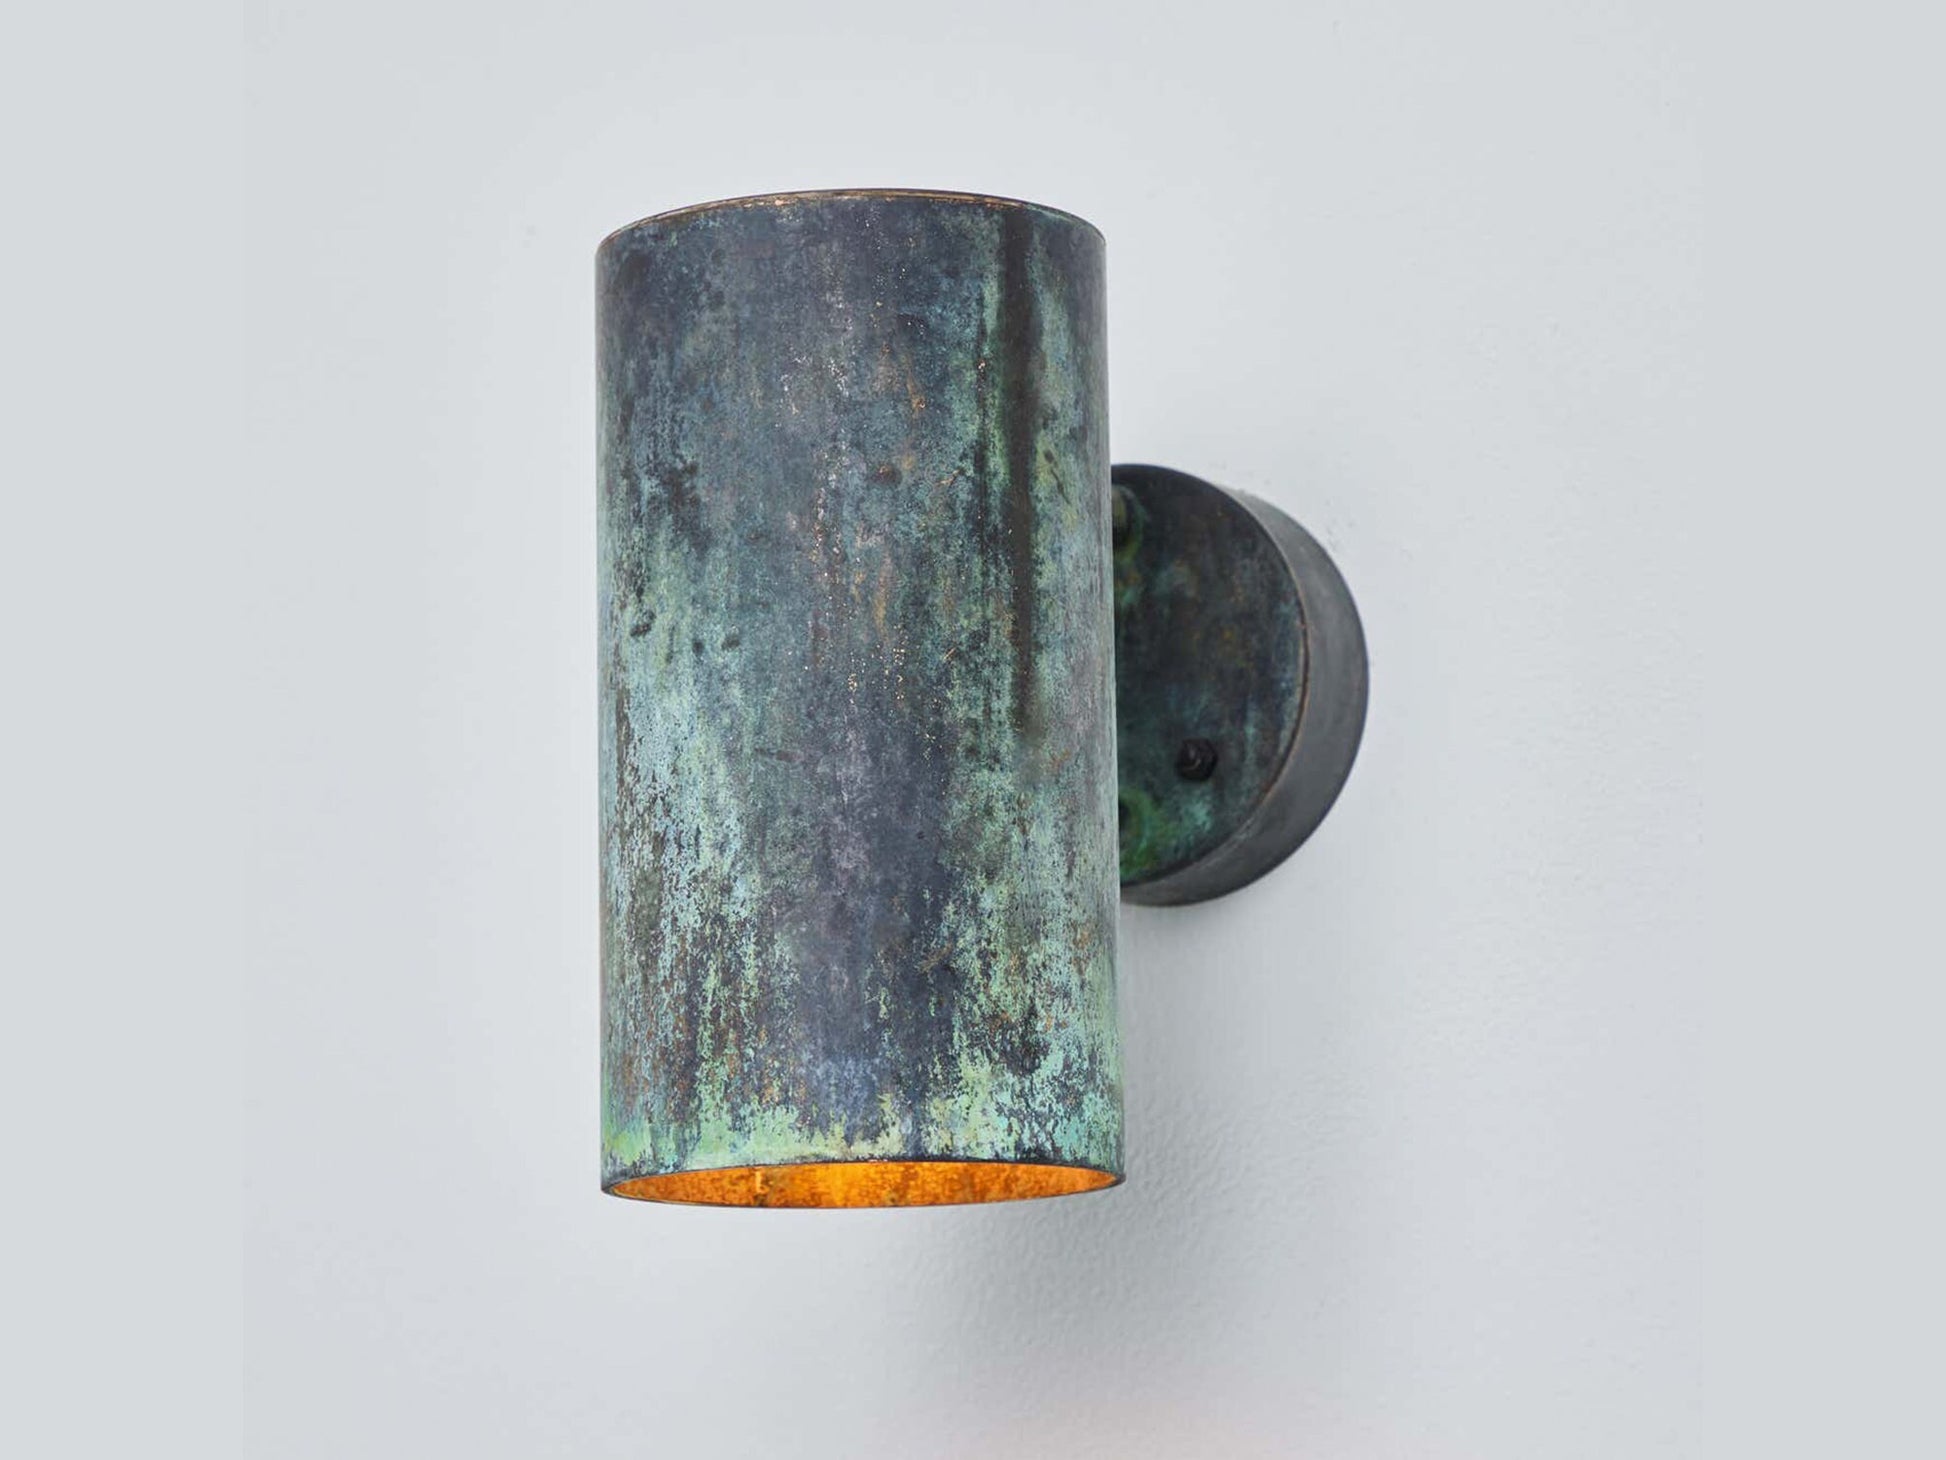 Rustic Tubular Shape Wall Lights with Captivating Glow